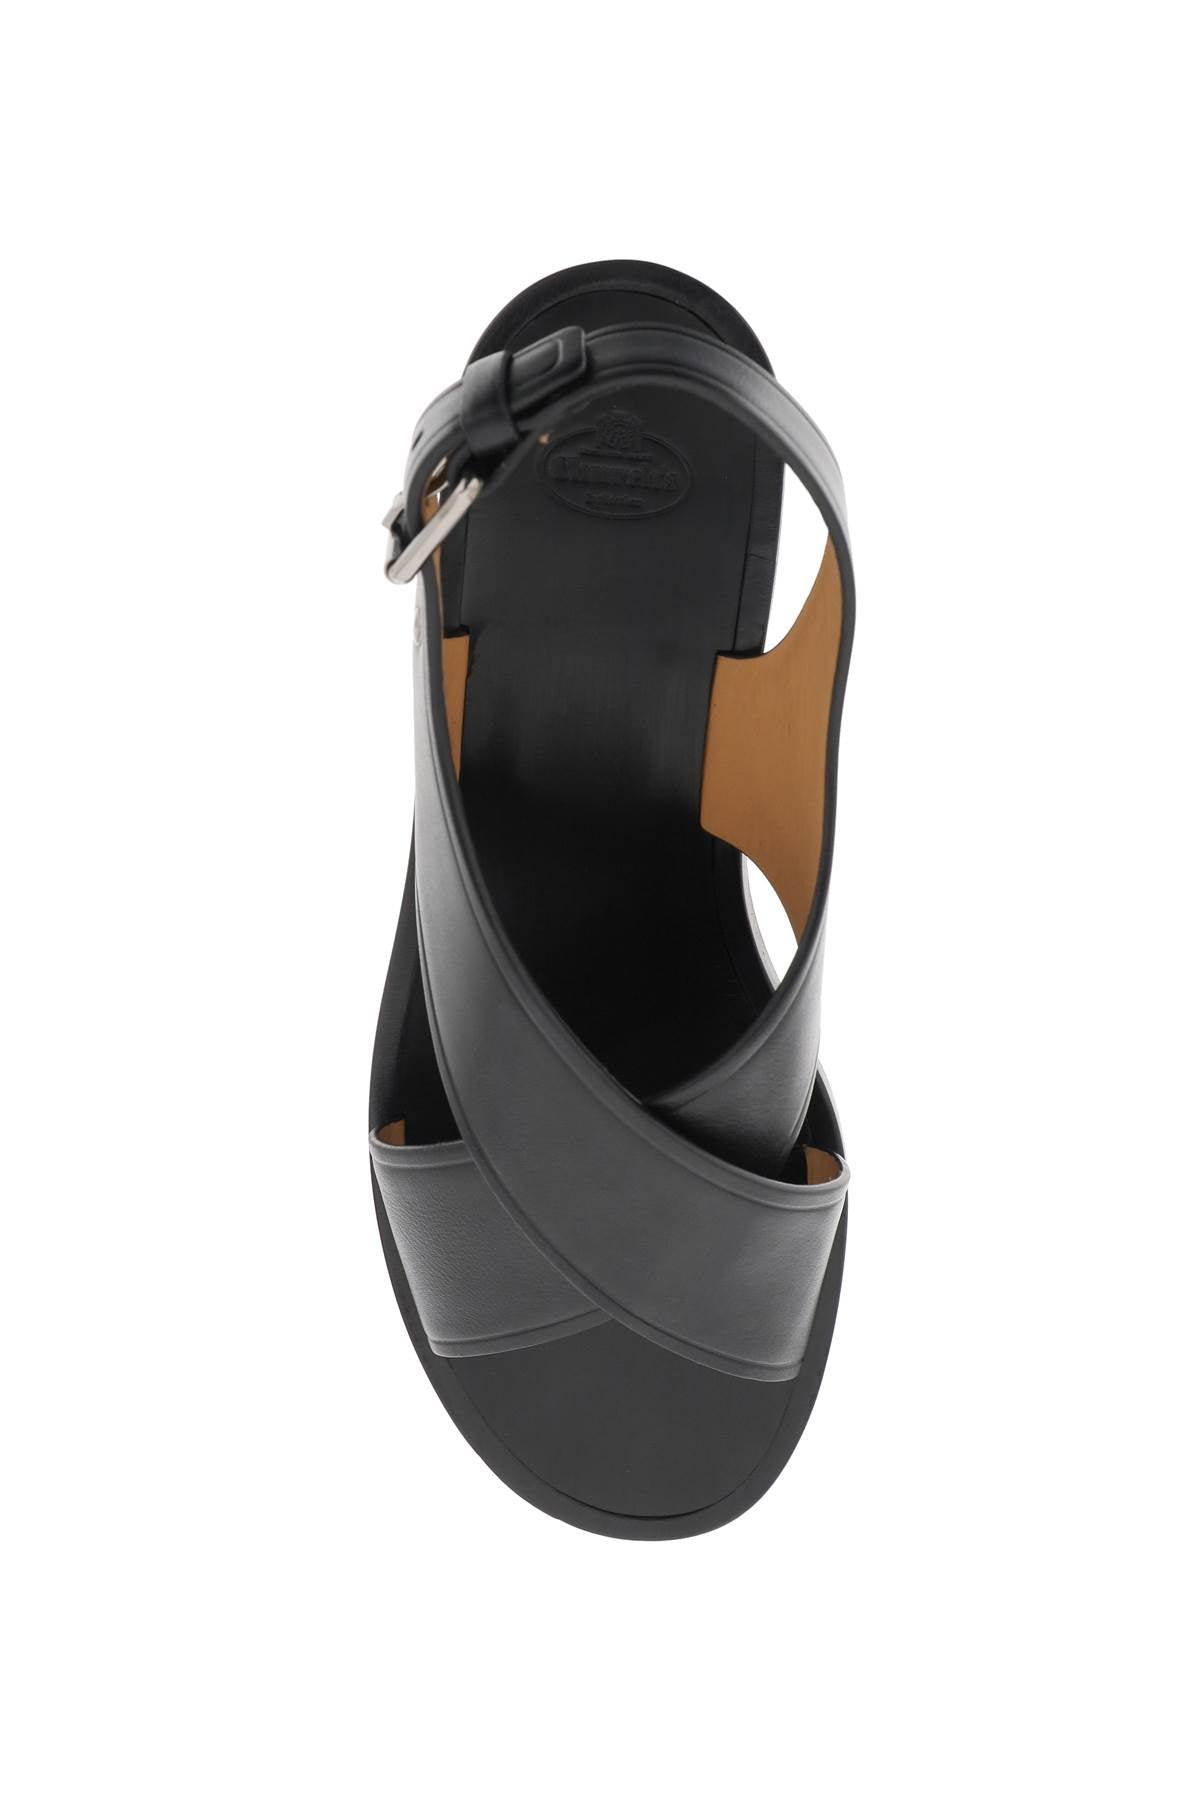 CHURCH'S Black Crossover Strapped Sandals for Women - SS24